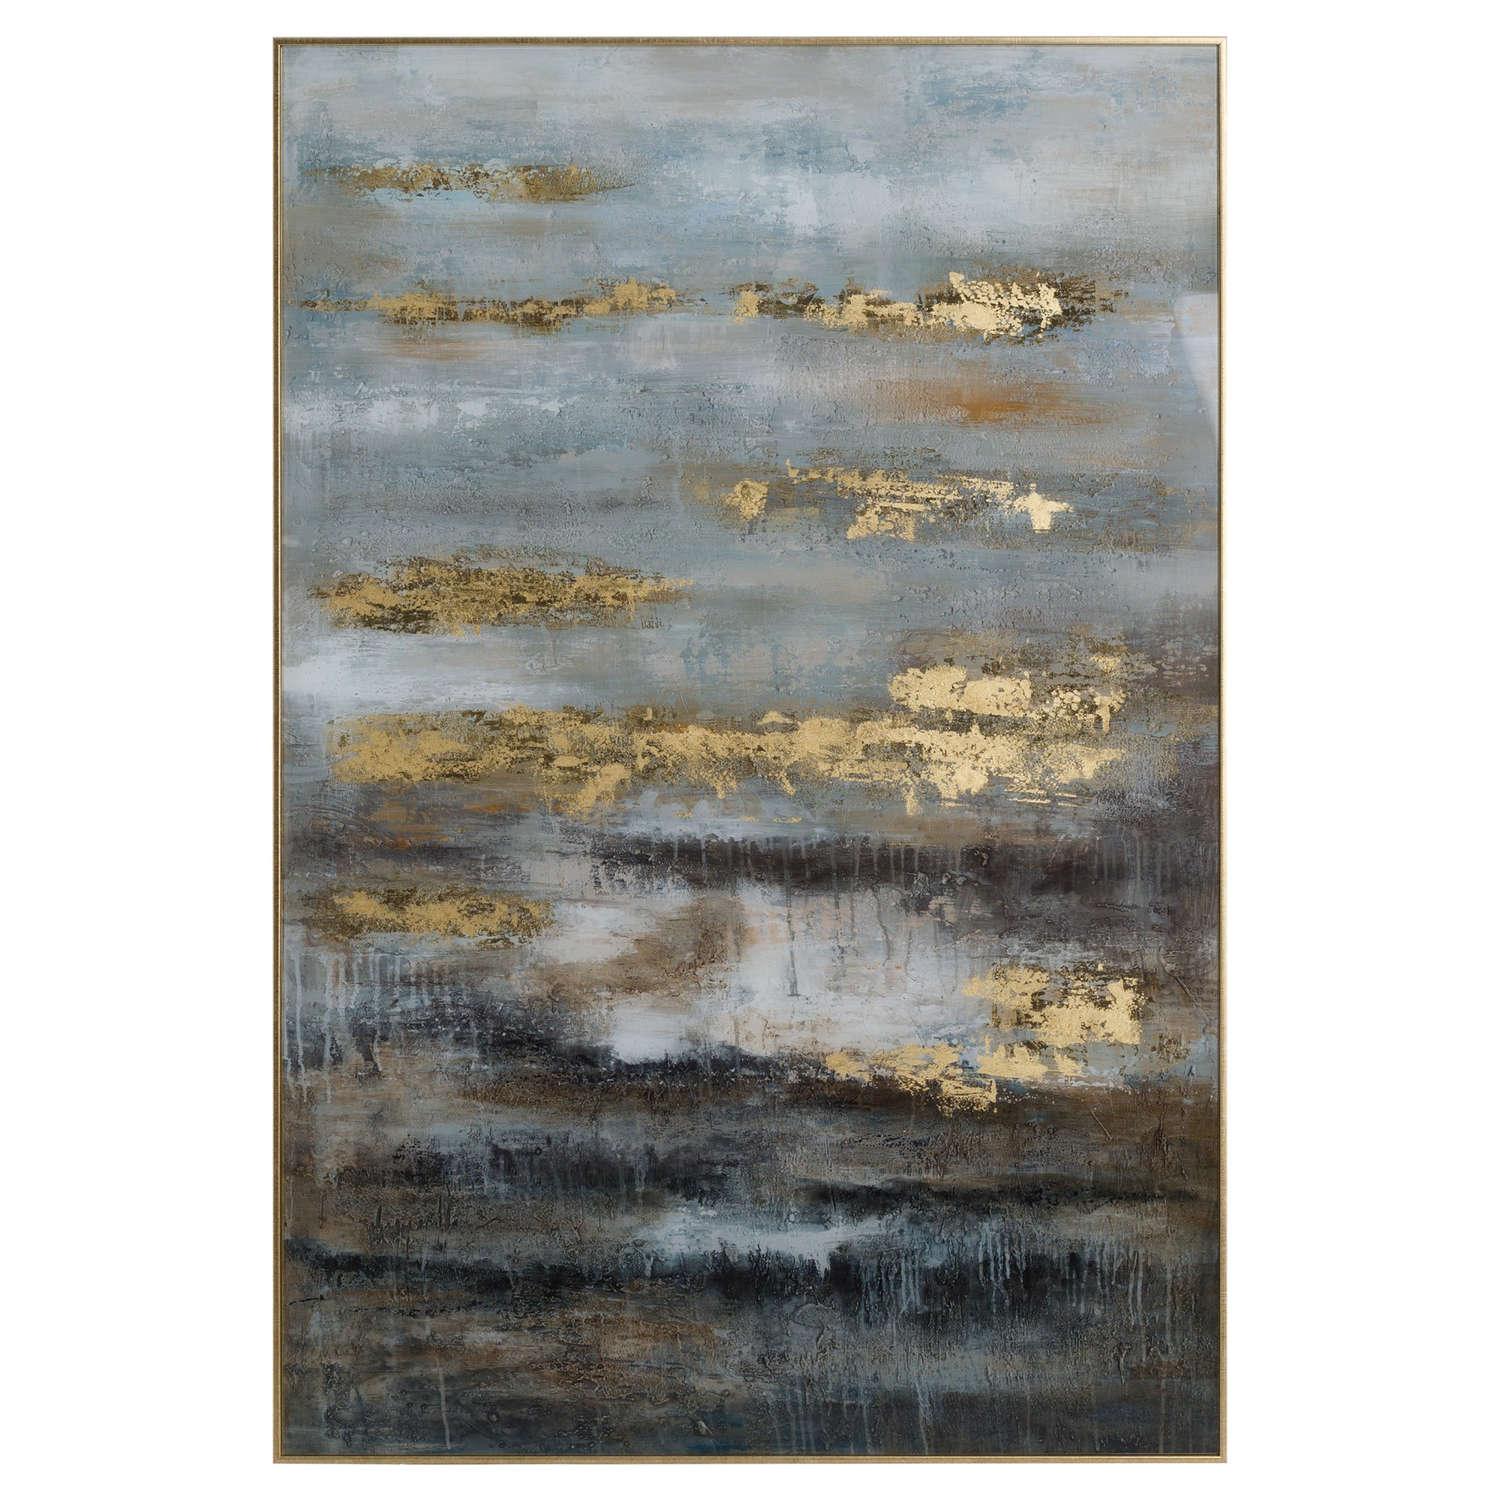 Large Abstract Grey And Gold Glass Image With Gold Frame - £239.95 - Art & Printed Products > Printed Art > Other Printed Art 